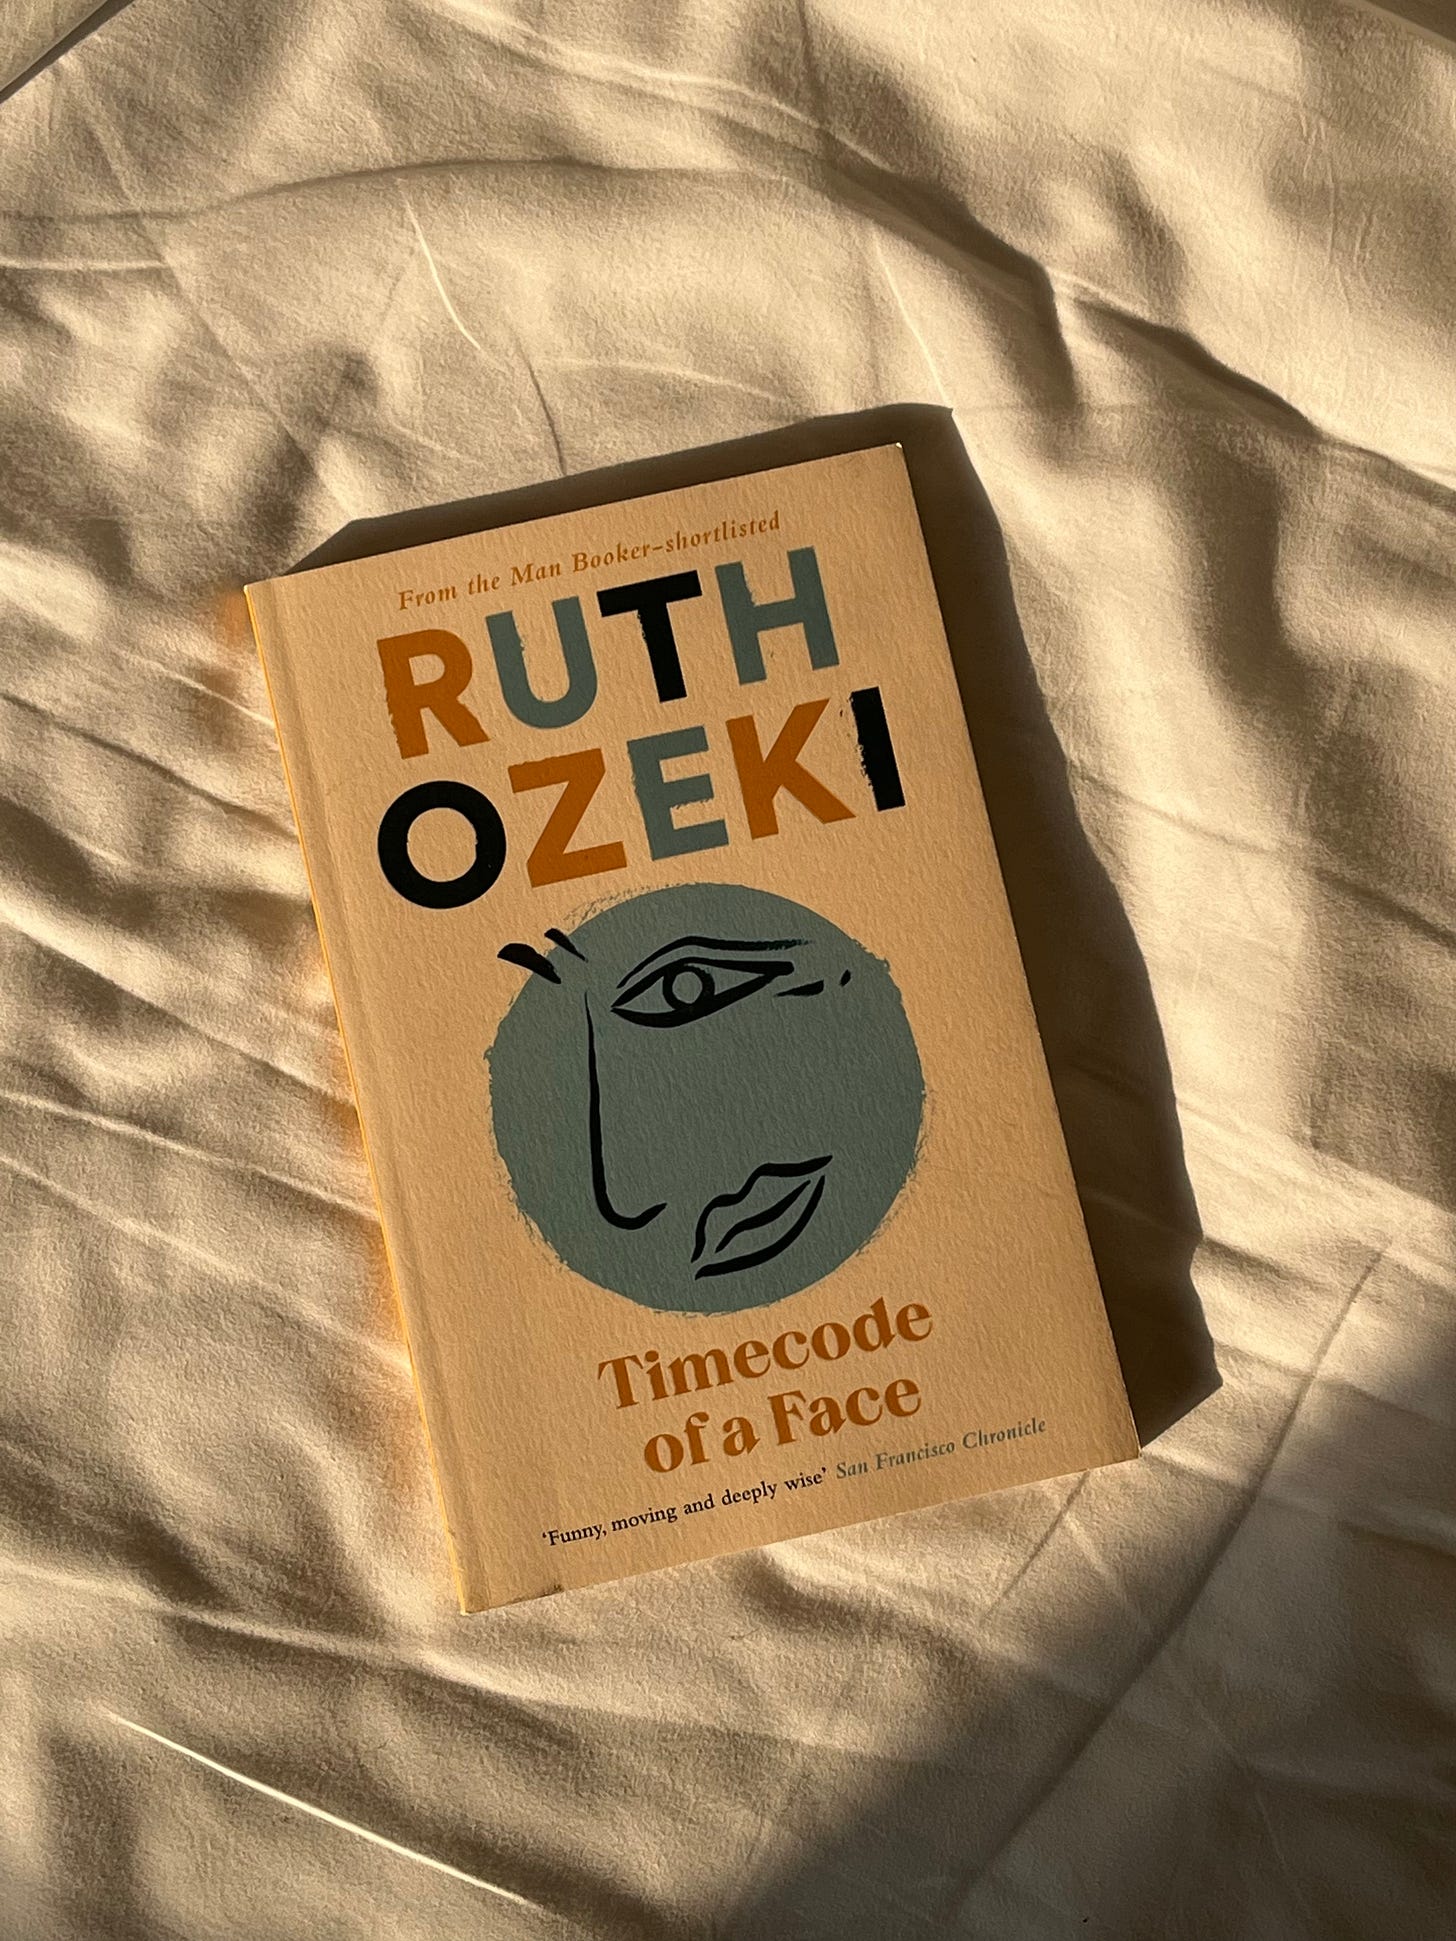 Ruth Ozeki’s ‘Timecode of a Face’